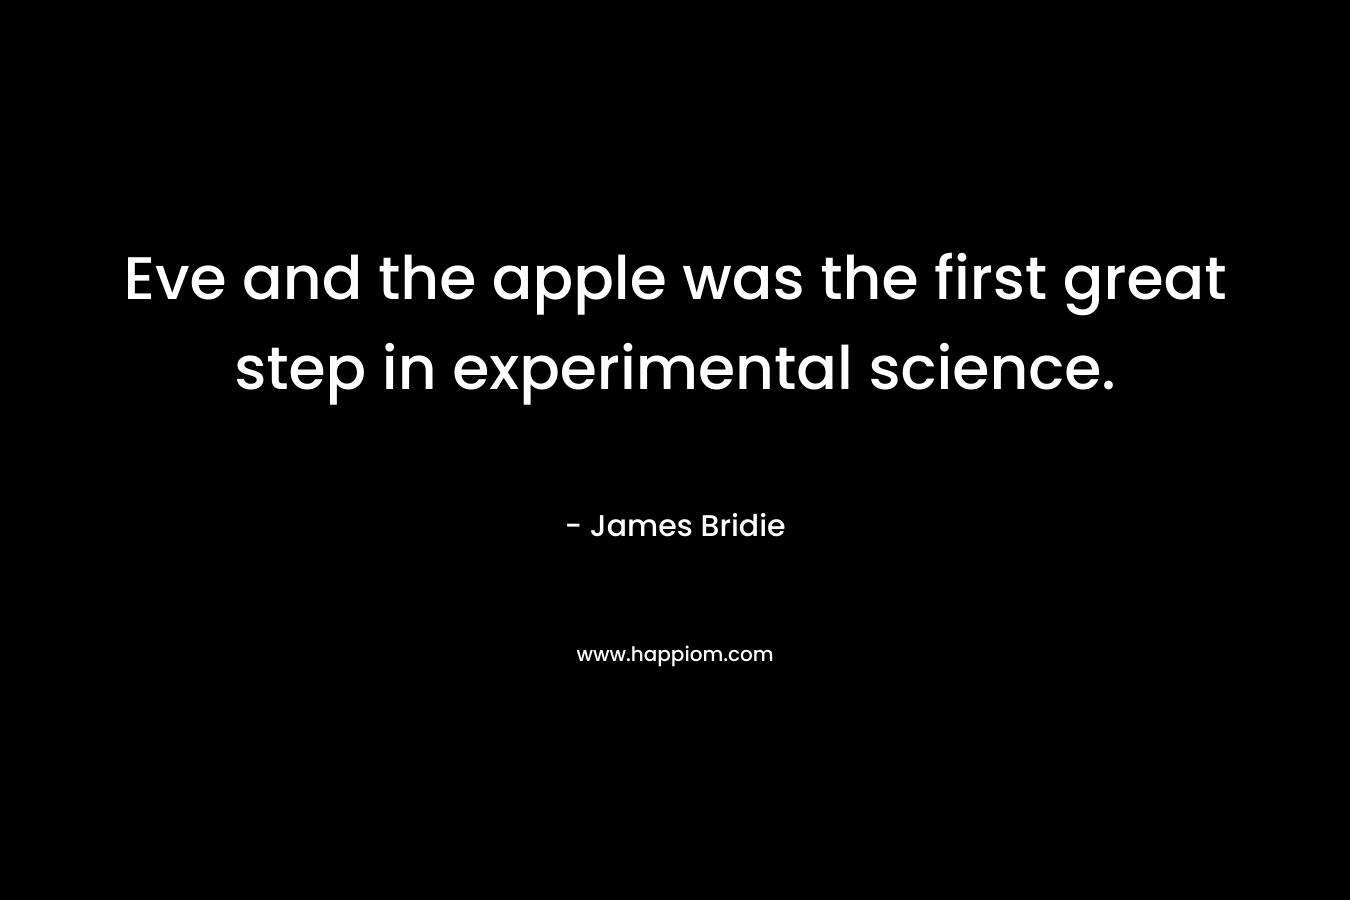 Eve and the apple was the first great step in experimental science. – James Bridie